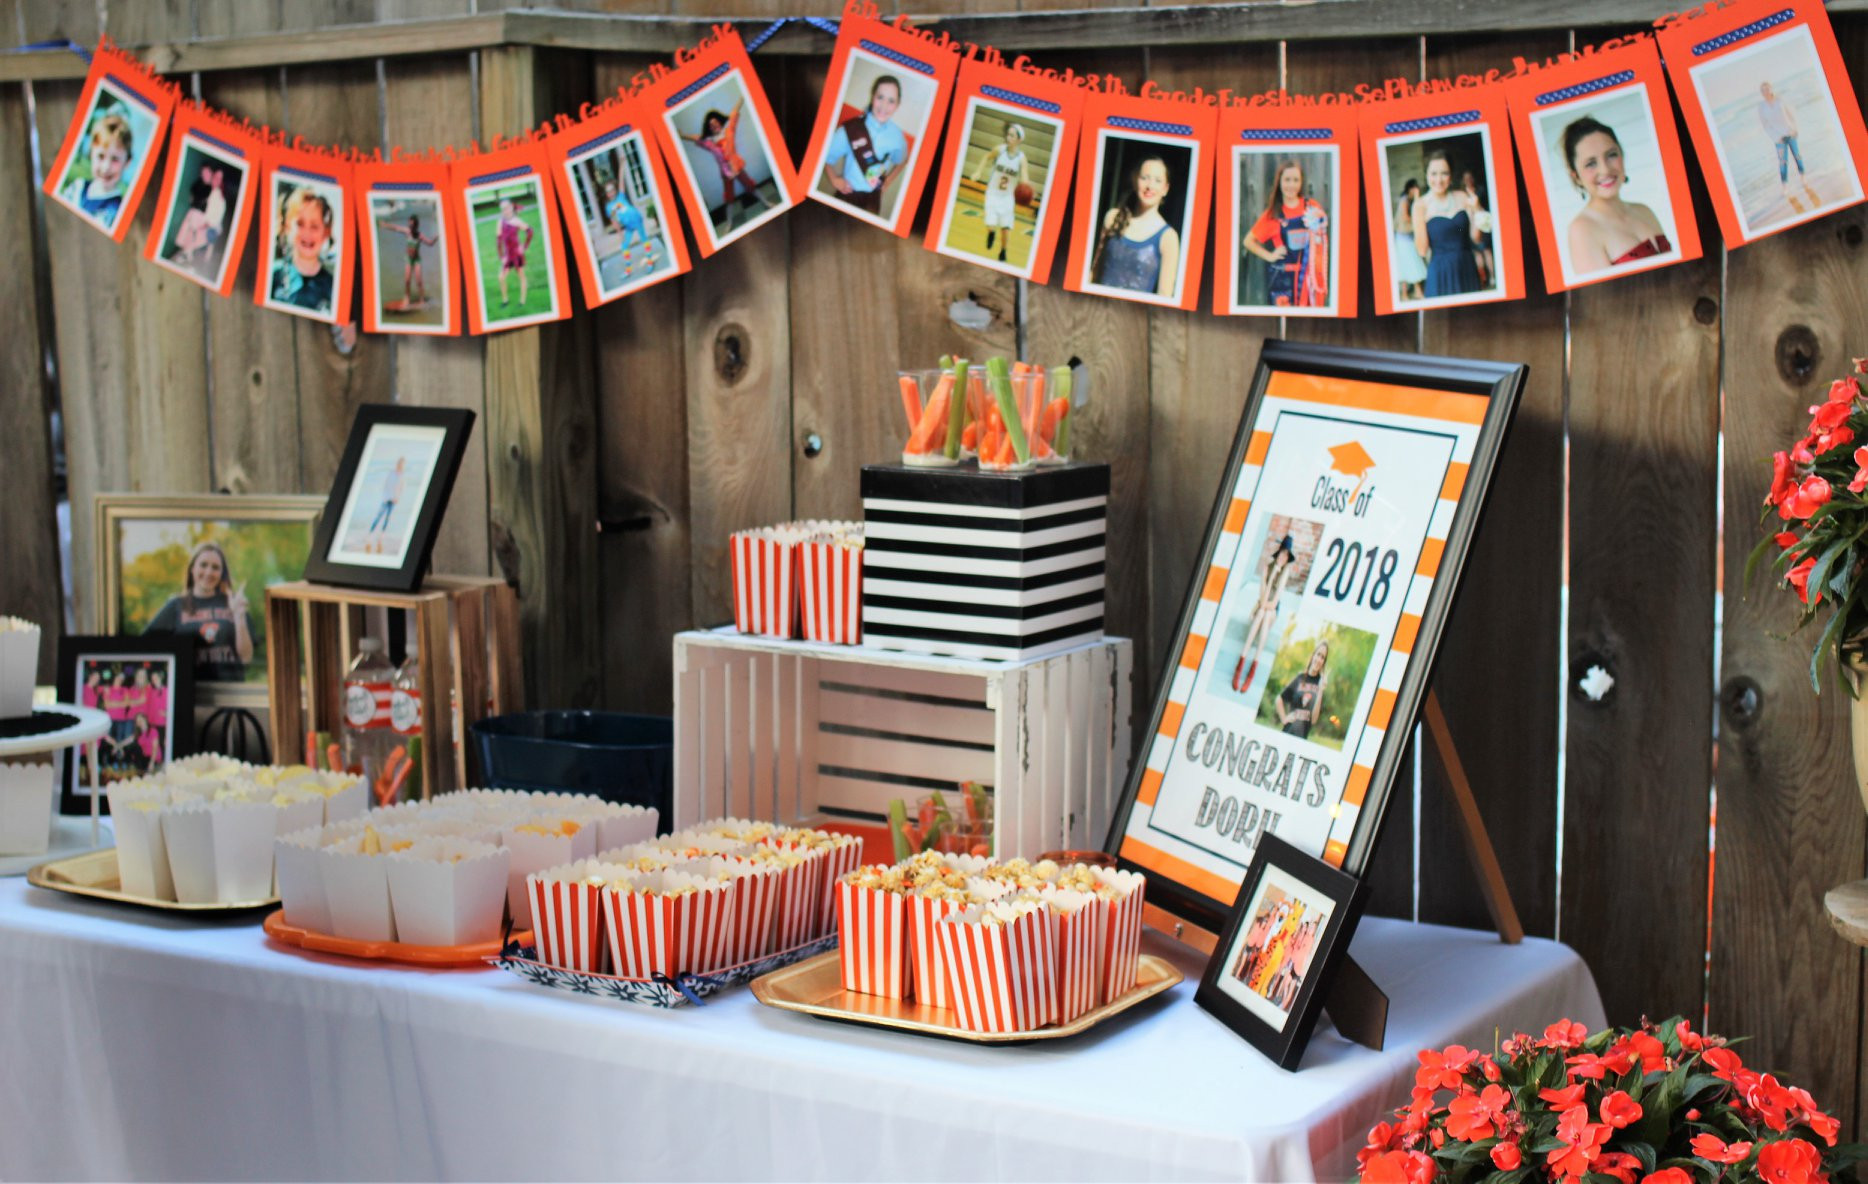 Ideas For A Graduation Party
 Graduation Party Ideas How to Celebrate Your Senior s Big Day